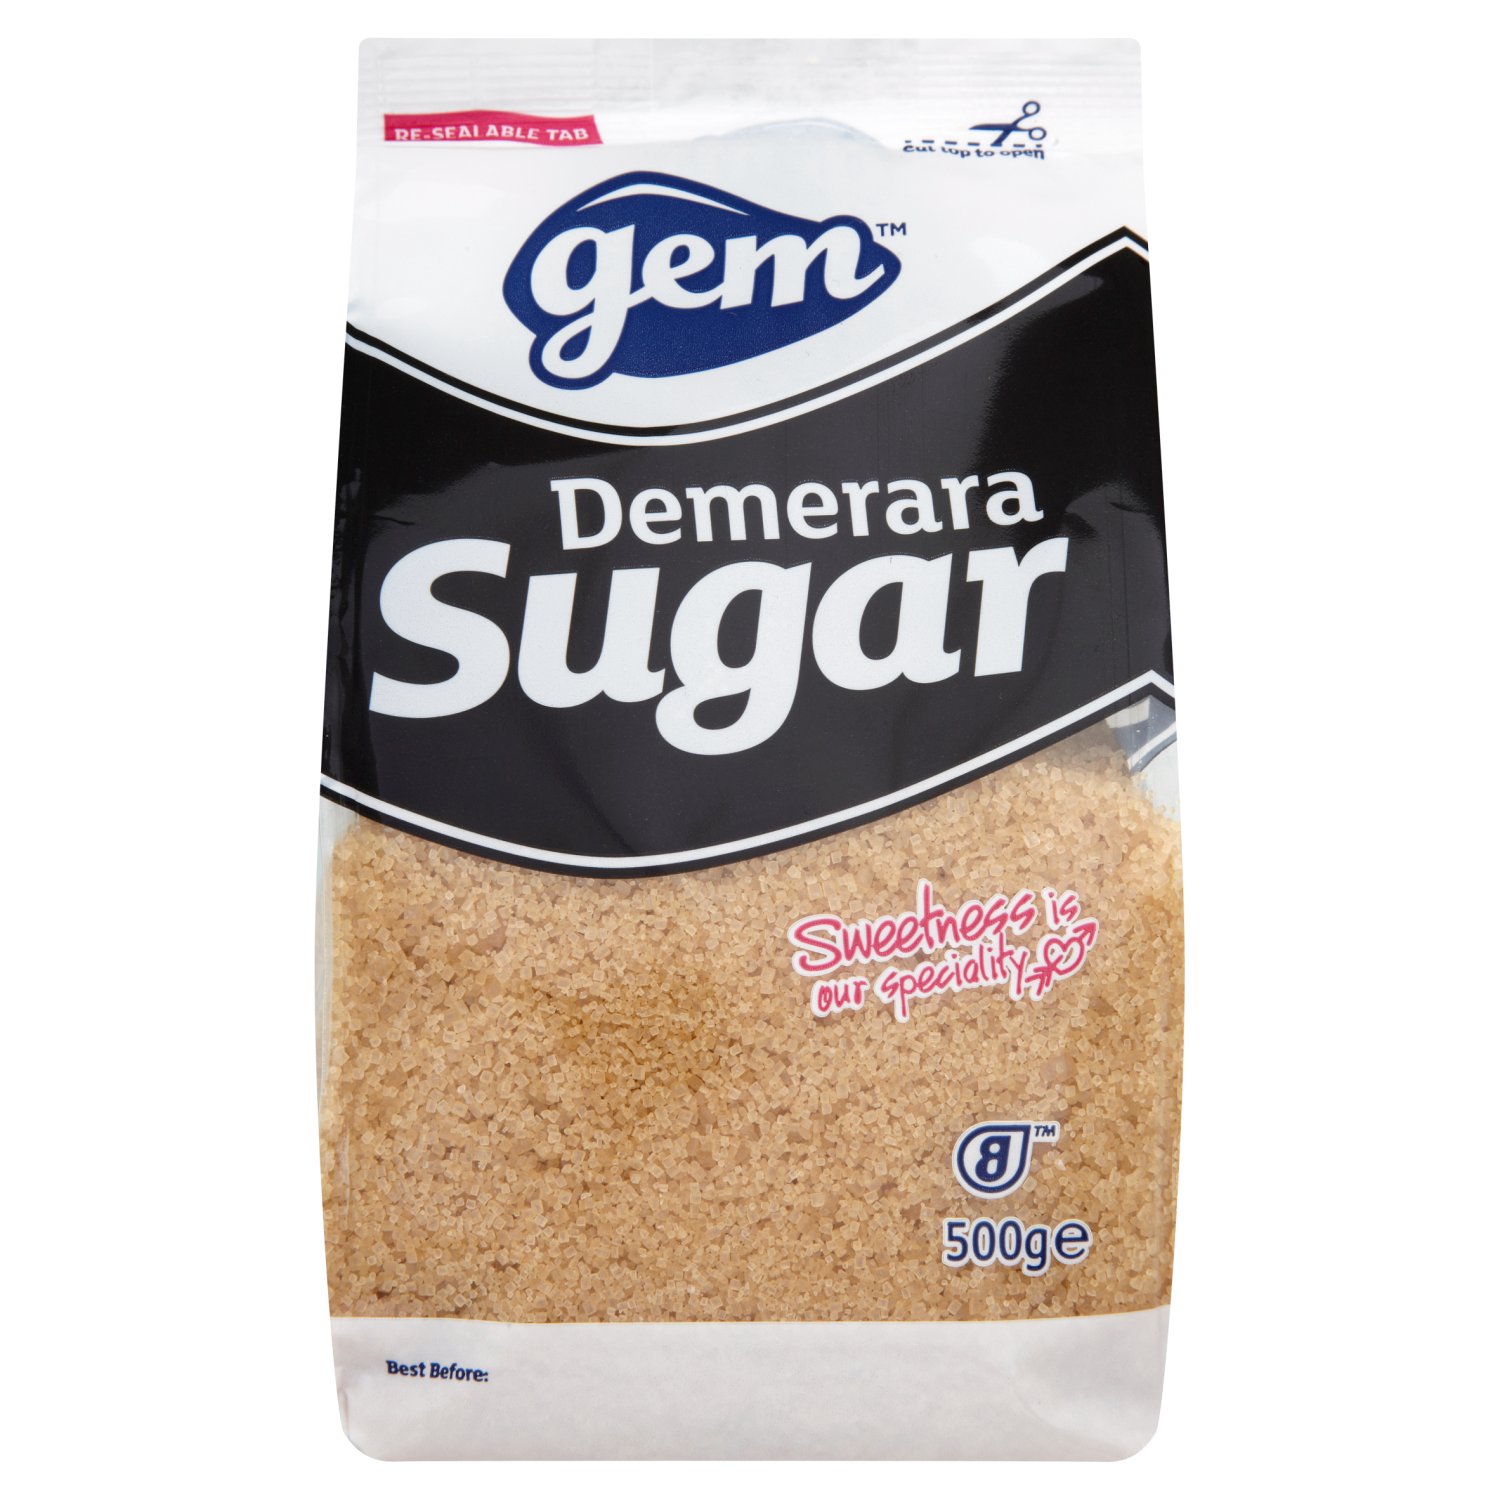 Yummy, crunchy, sweet and scrummy...
Demerara Sugar makes a delicious crunchy topping for cakes, biscuits and fruit crumbles and brings out the flavour of fresh coffee.
From all of us at Gem...